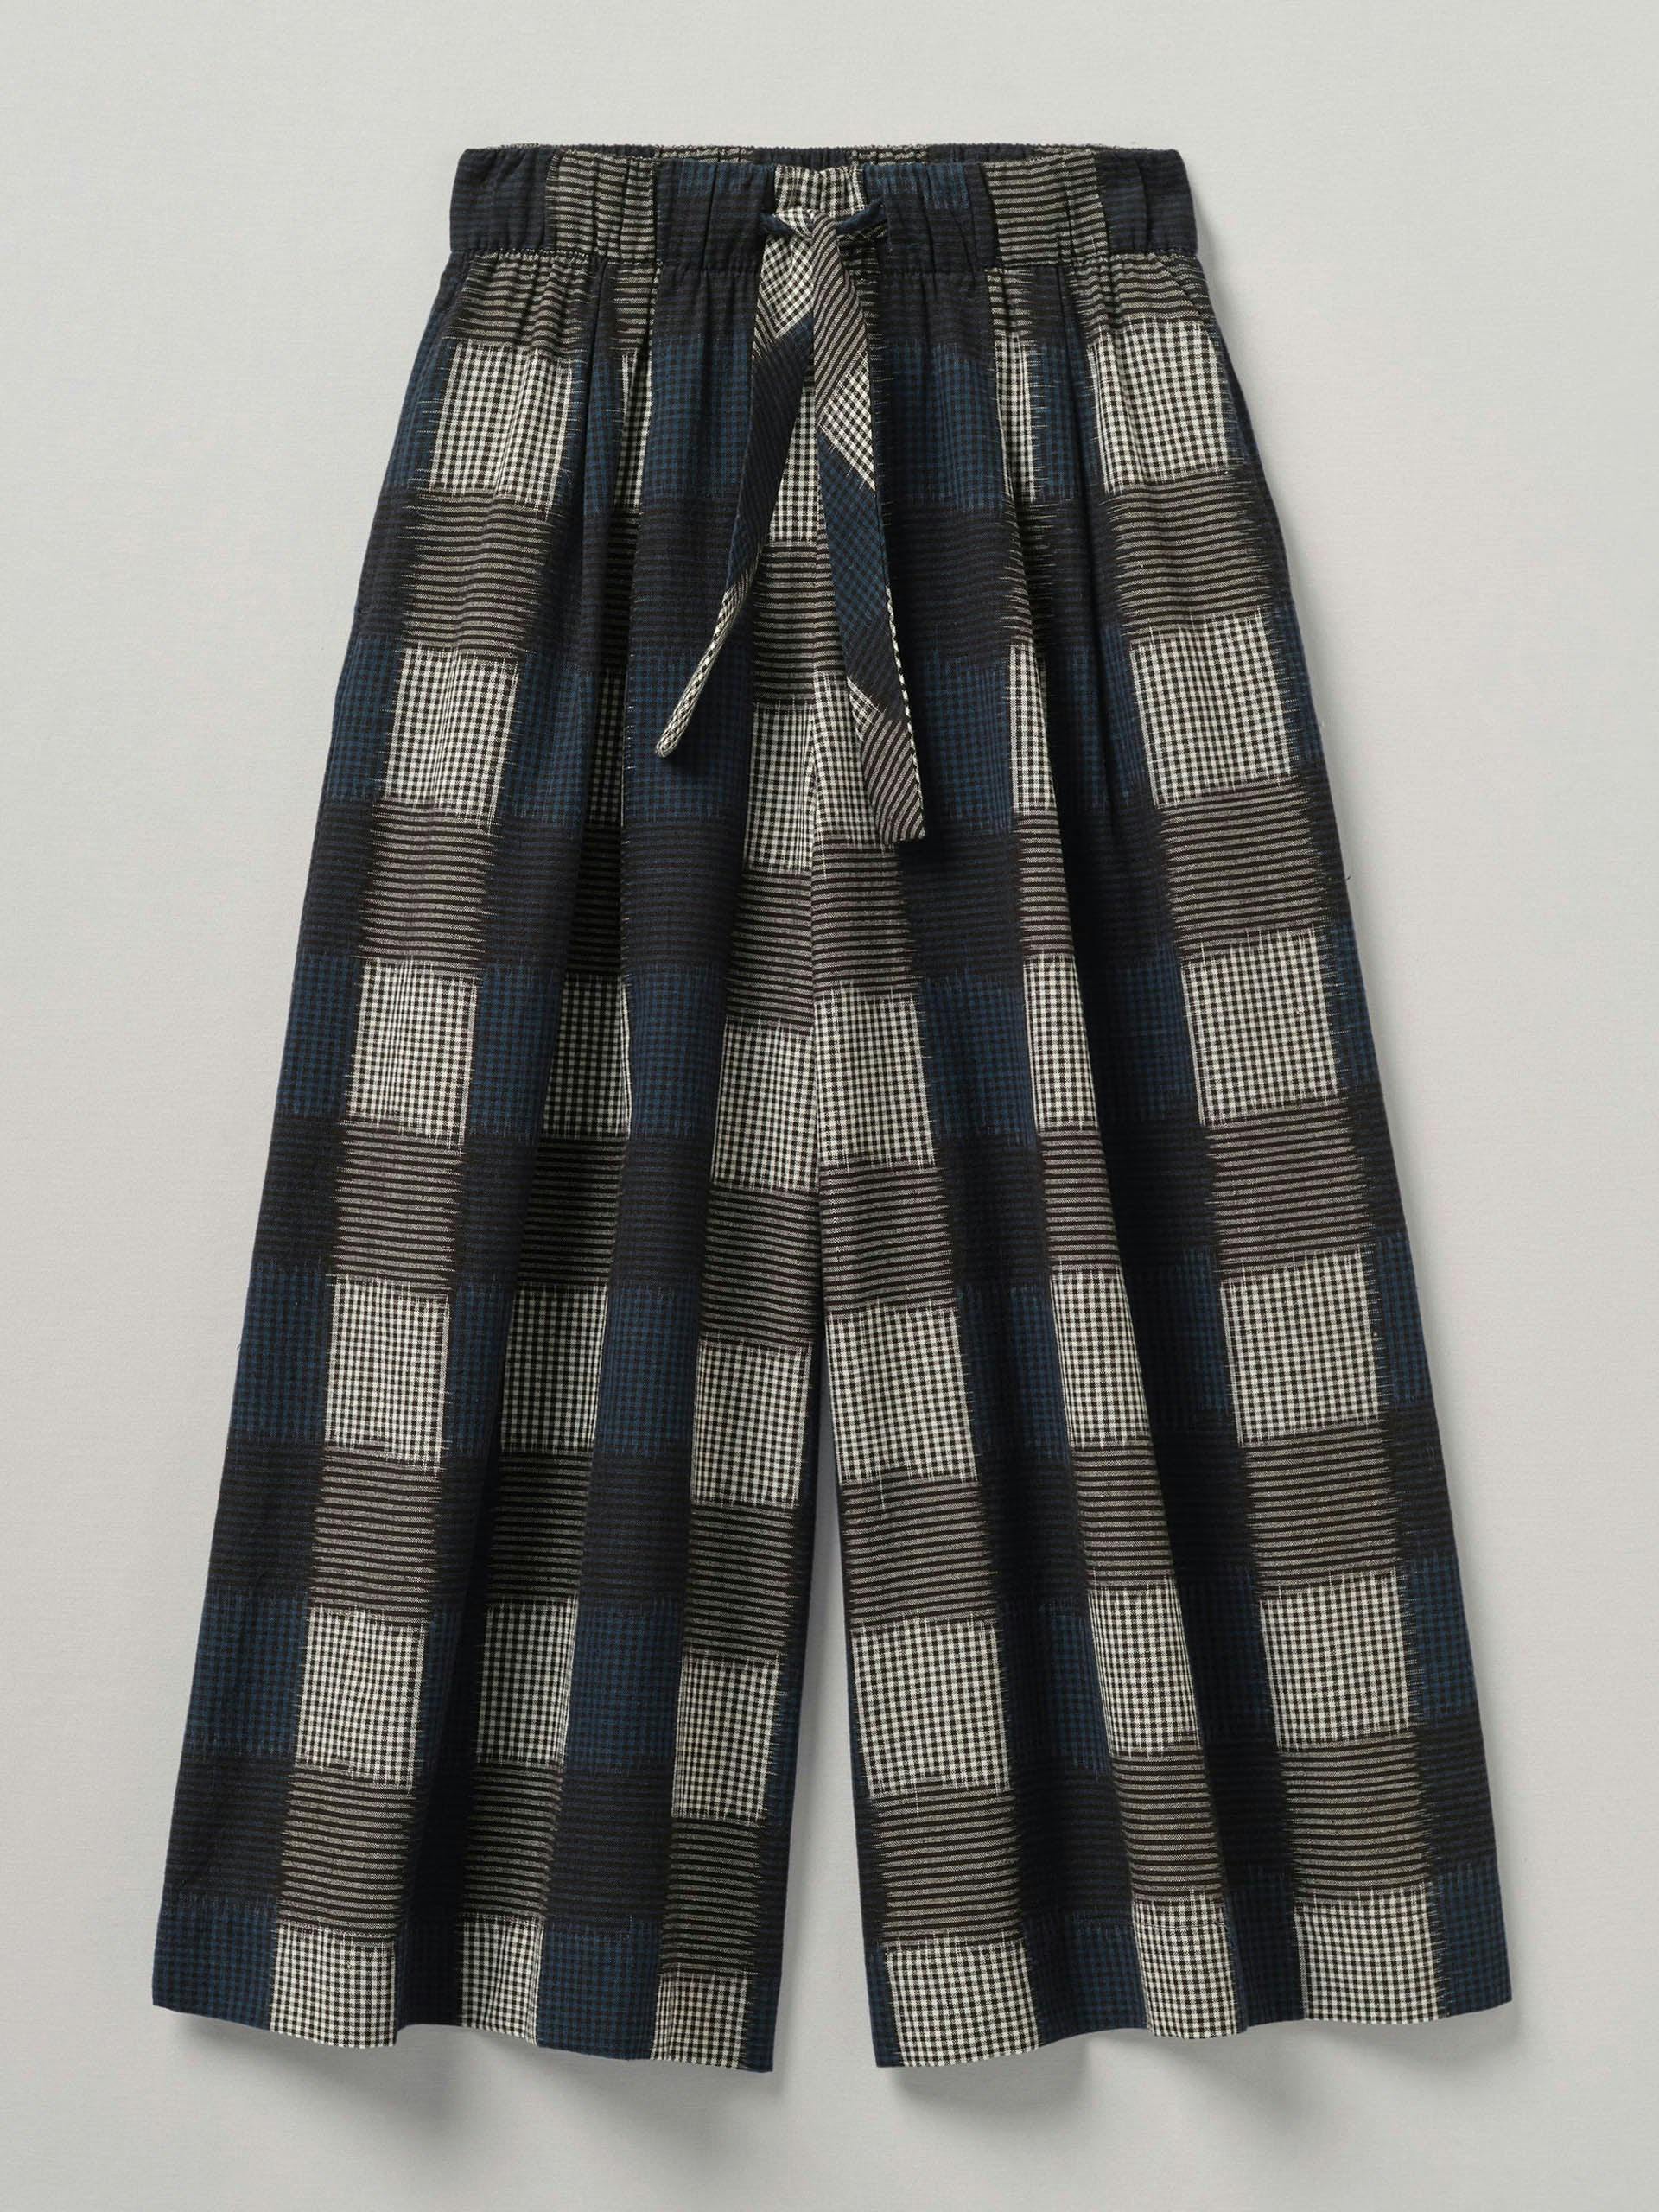 Handwoven checked ikat cullotes